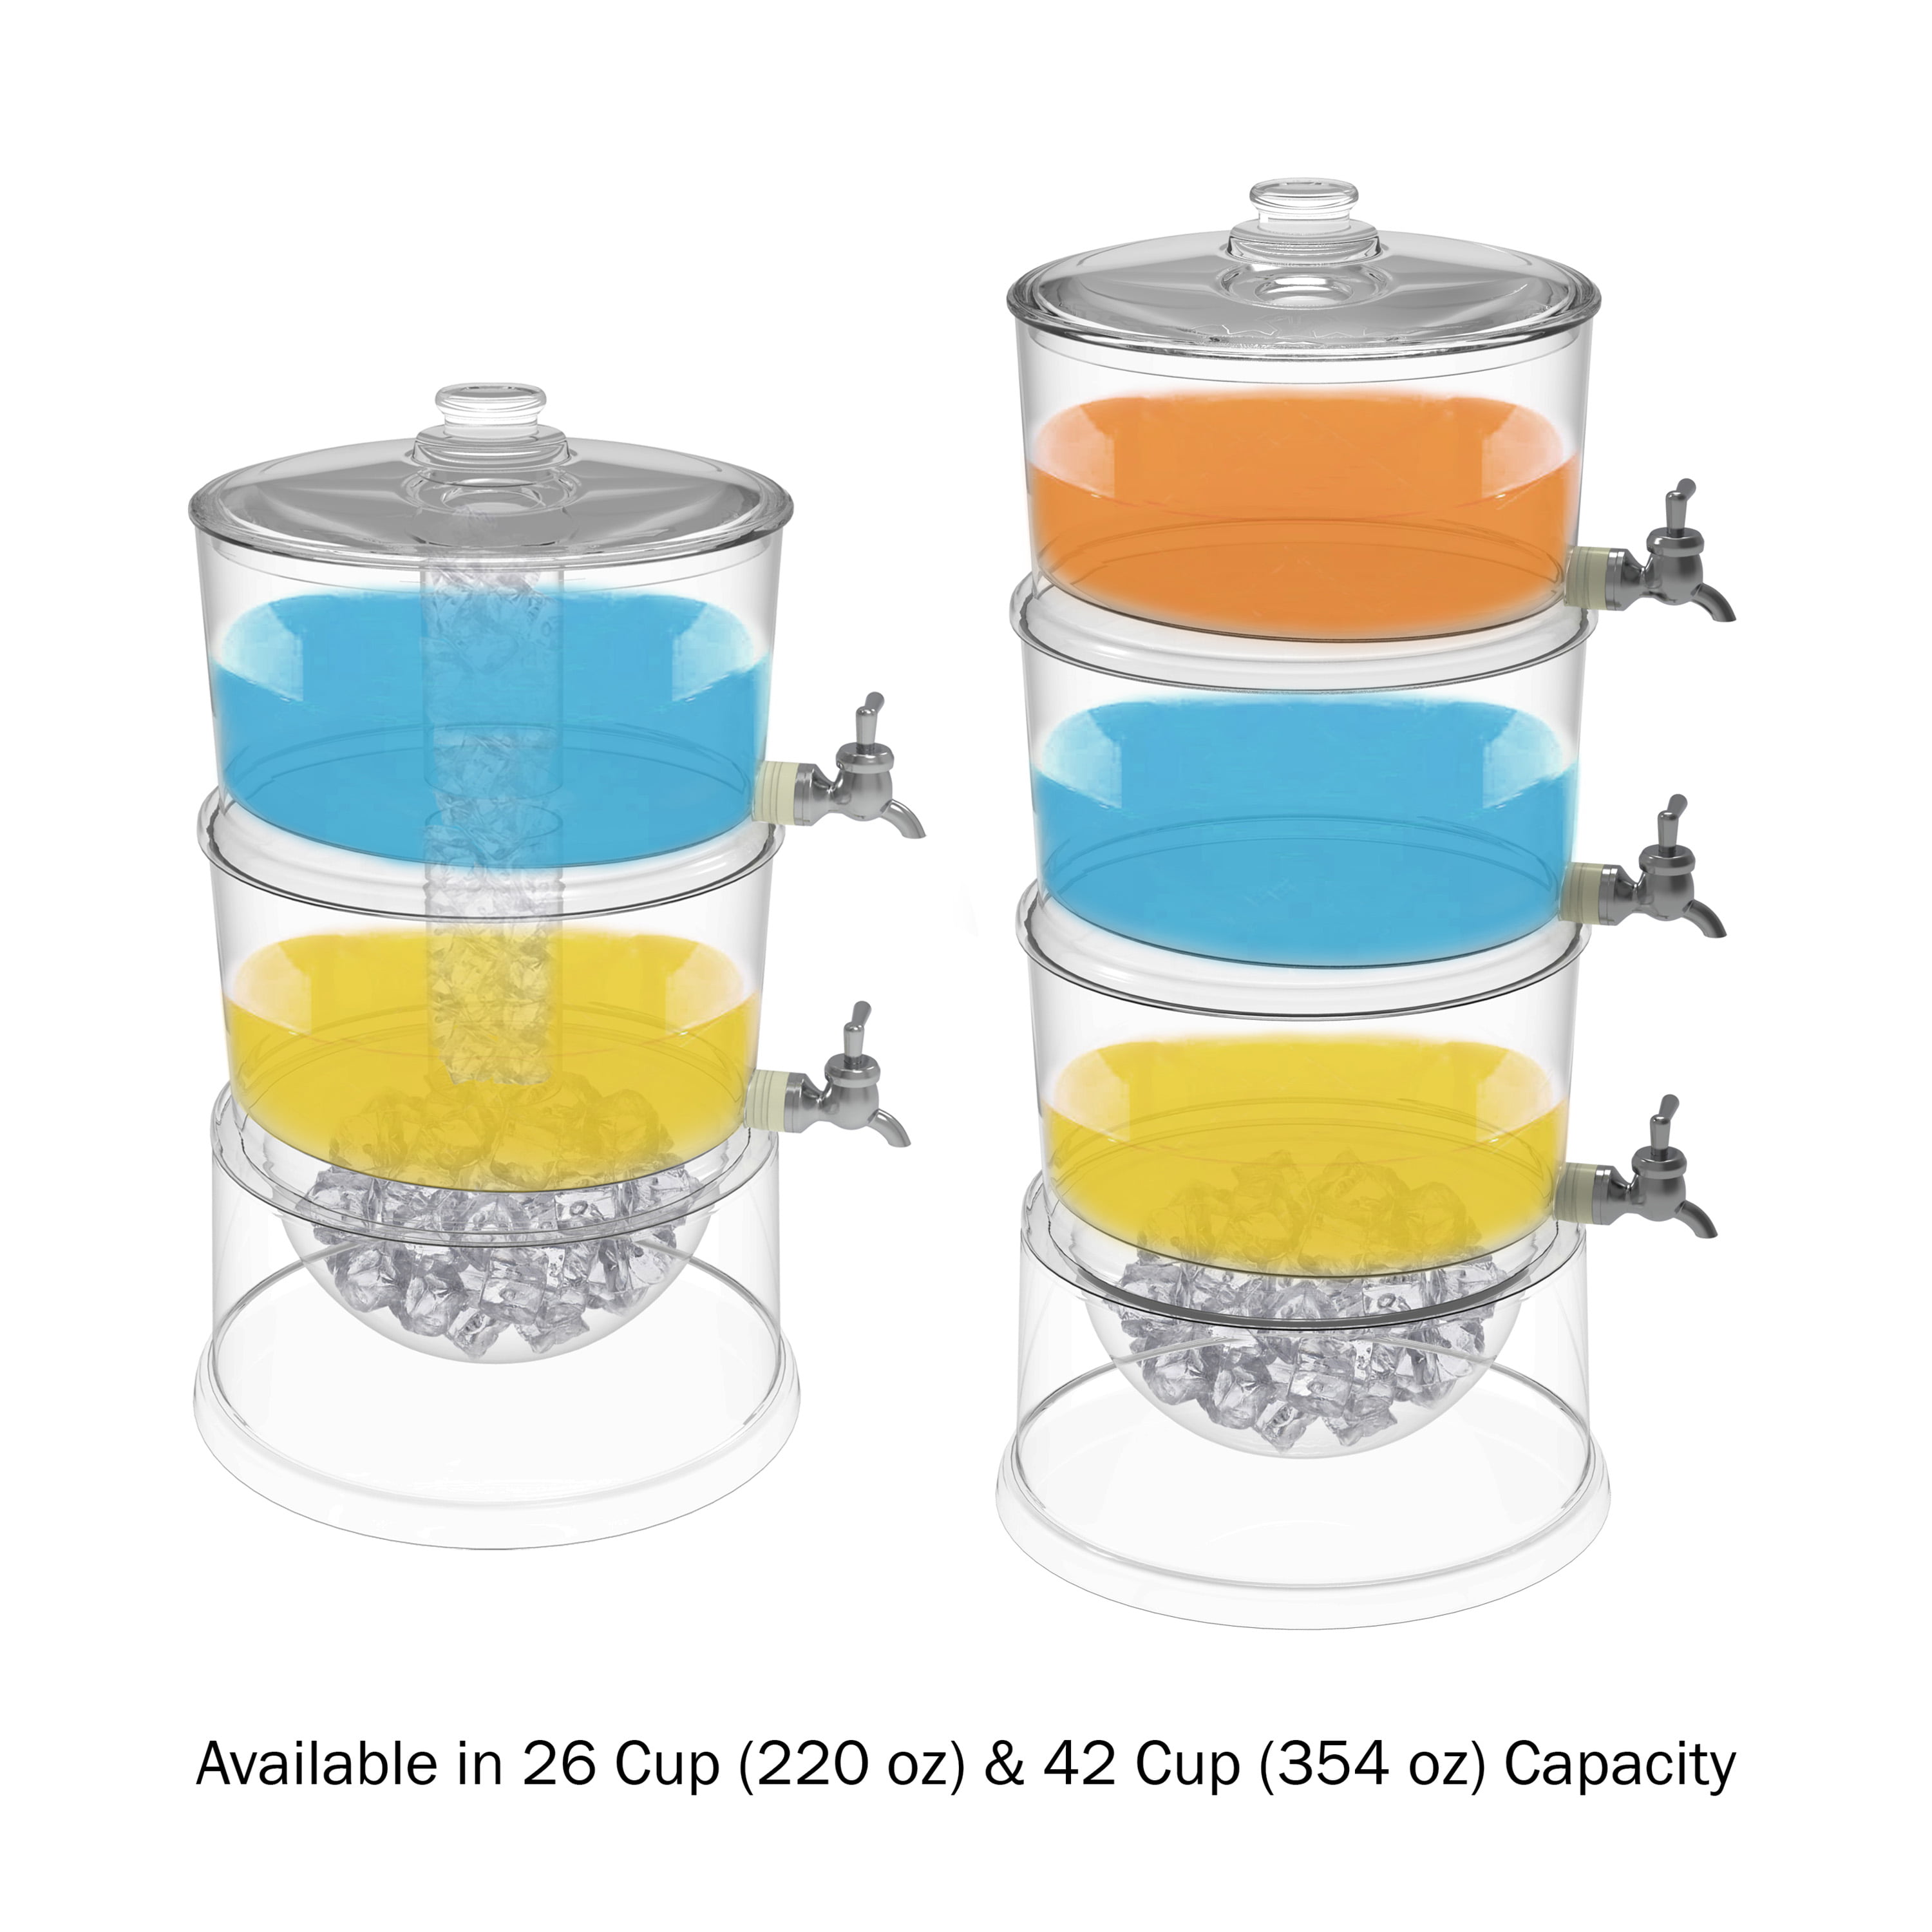 GZMR Black Poly Beverage Dispenser with Stand - 3L Capacity, Hot Beverage  Compatible, Dishwasher Safe - Perfect for Parties in the Beverage Dispensers  department at